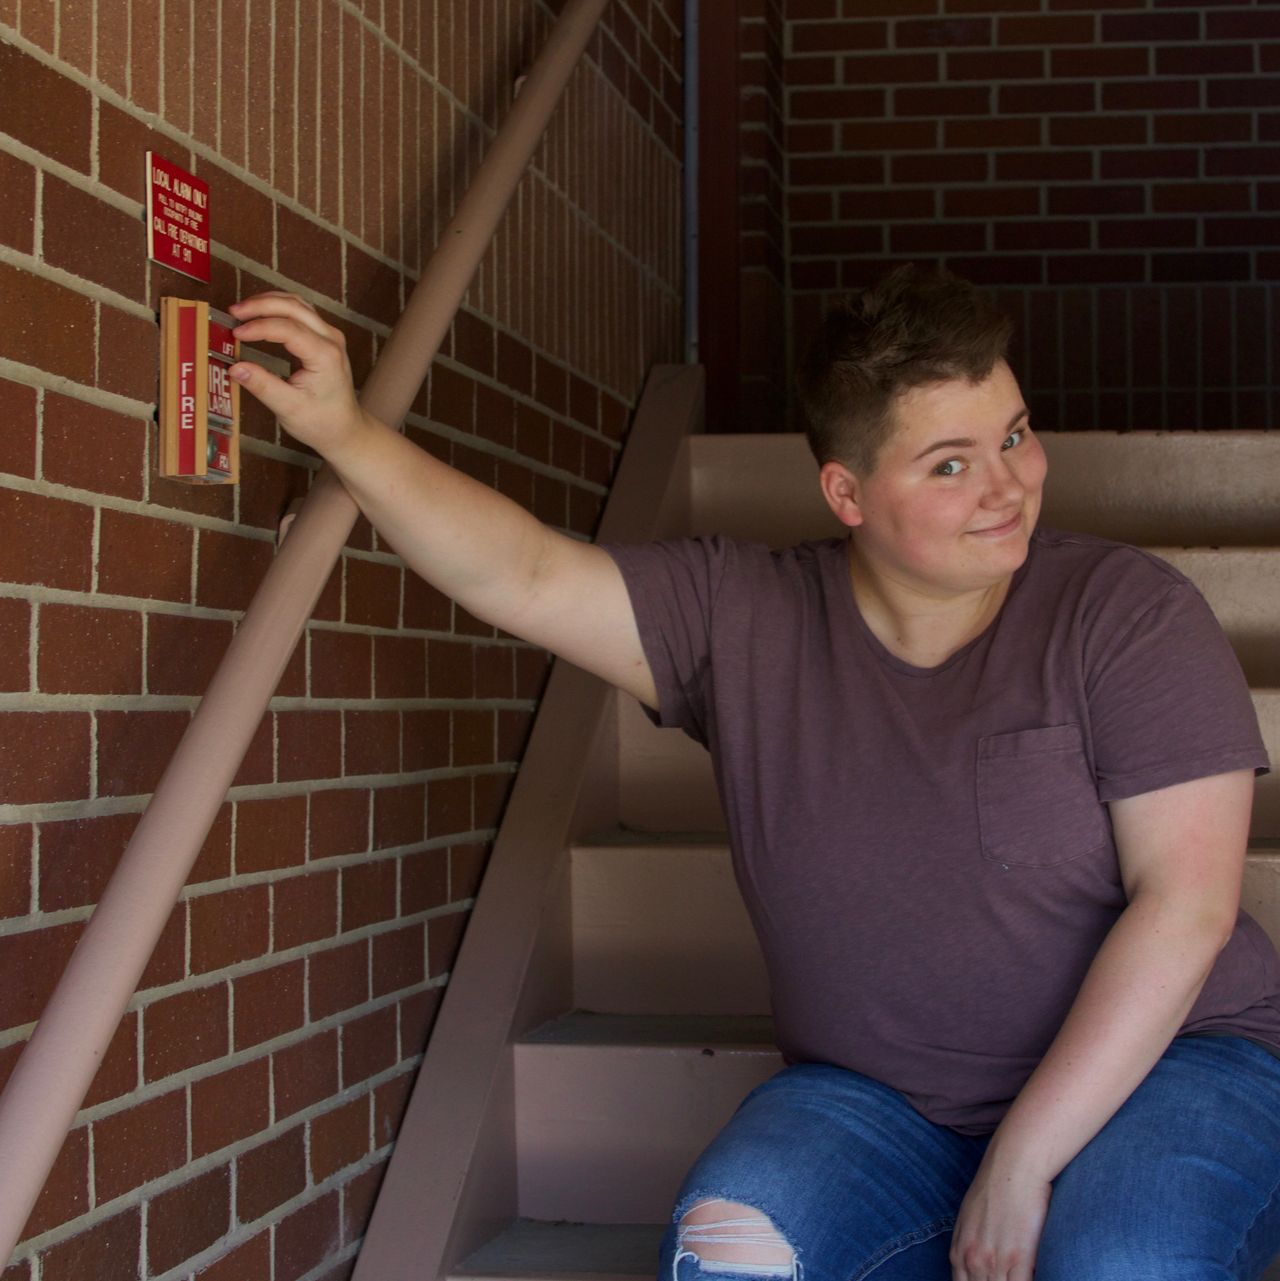 Reflecting on how friendly the BYU campus is toward queer and genderqueer students, Liza Holdaway told HuffPost, "it’s been really cool to see over the past three years that I’ve been at BYU how the atmosphere ... has changed over time."